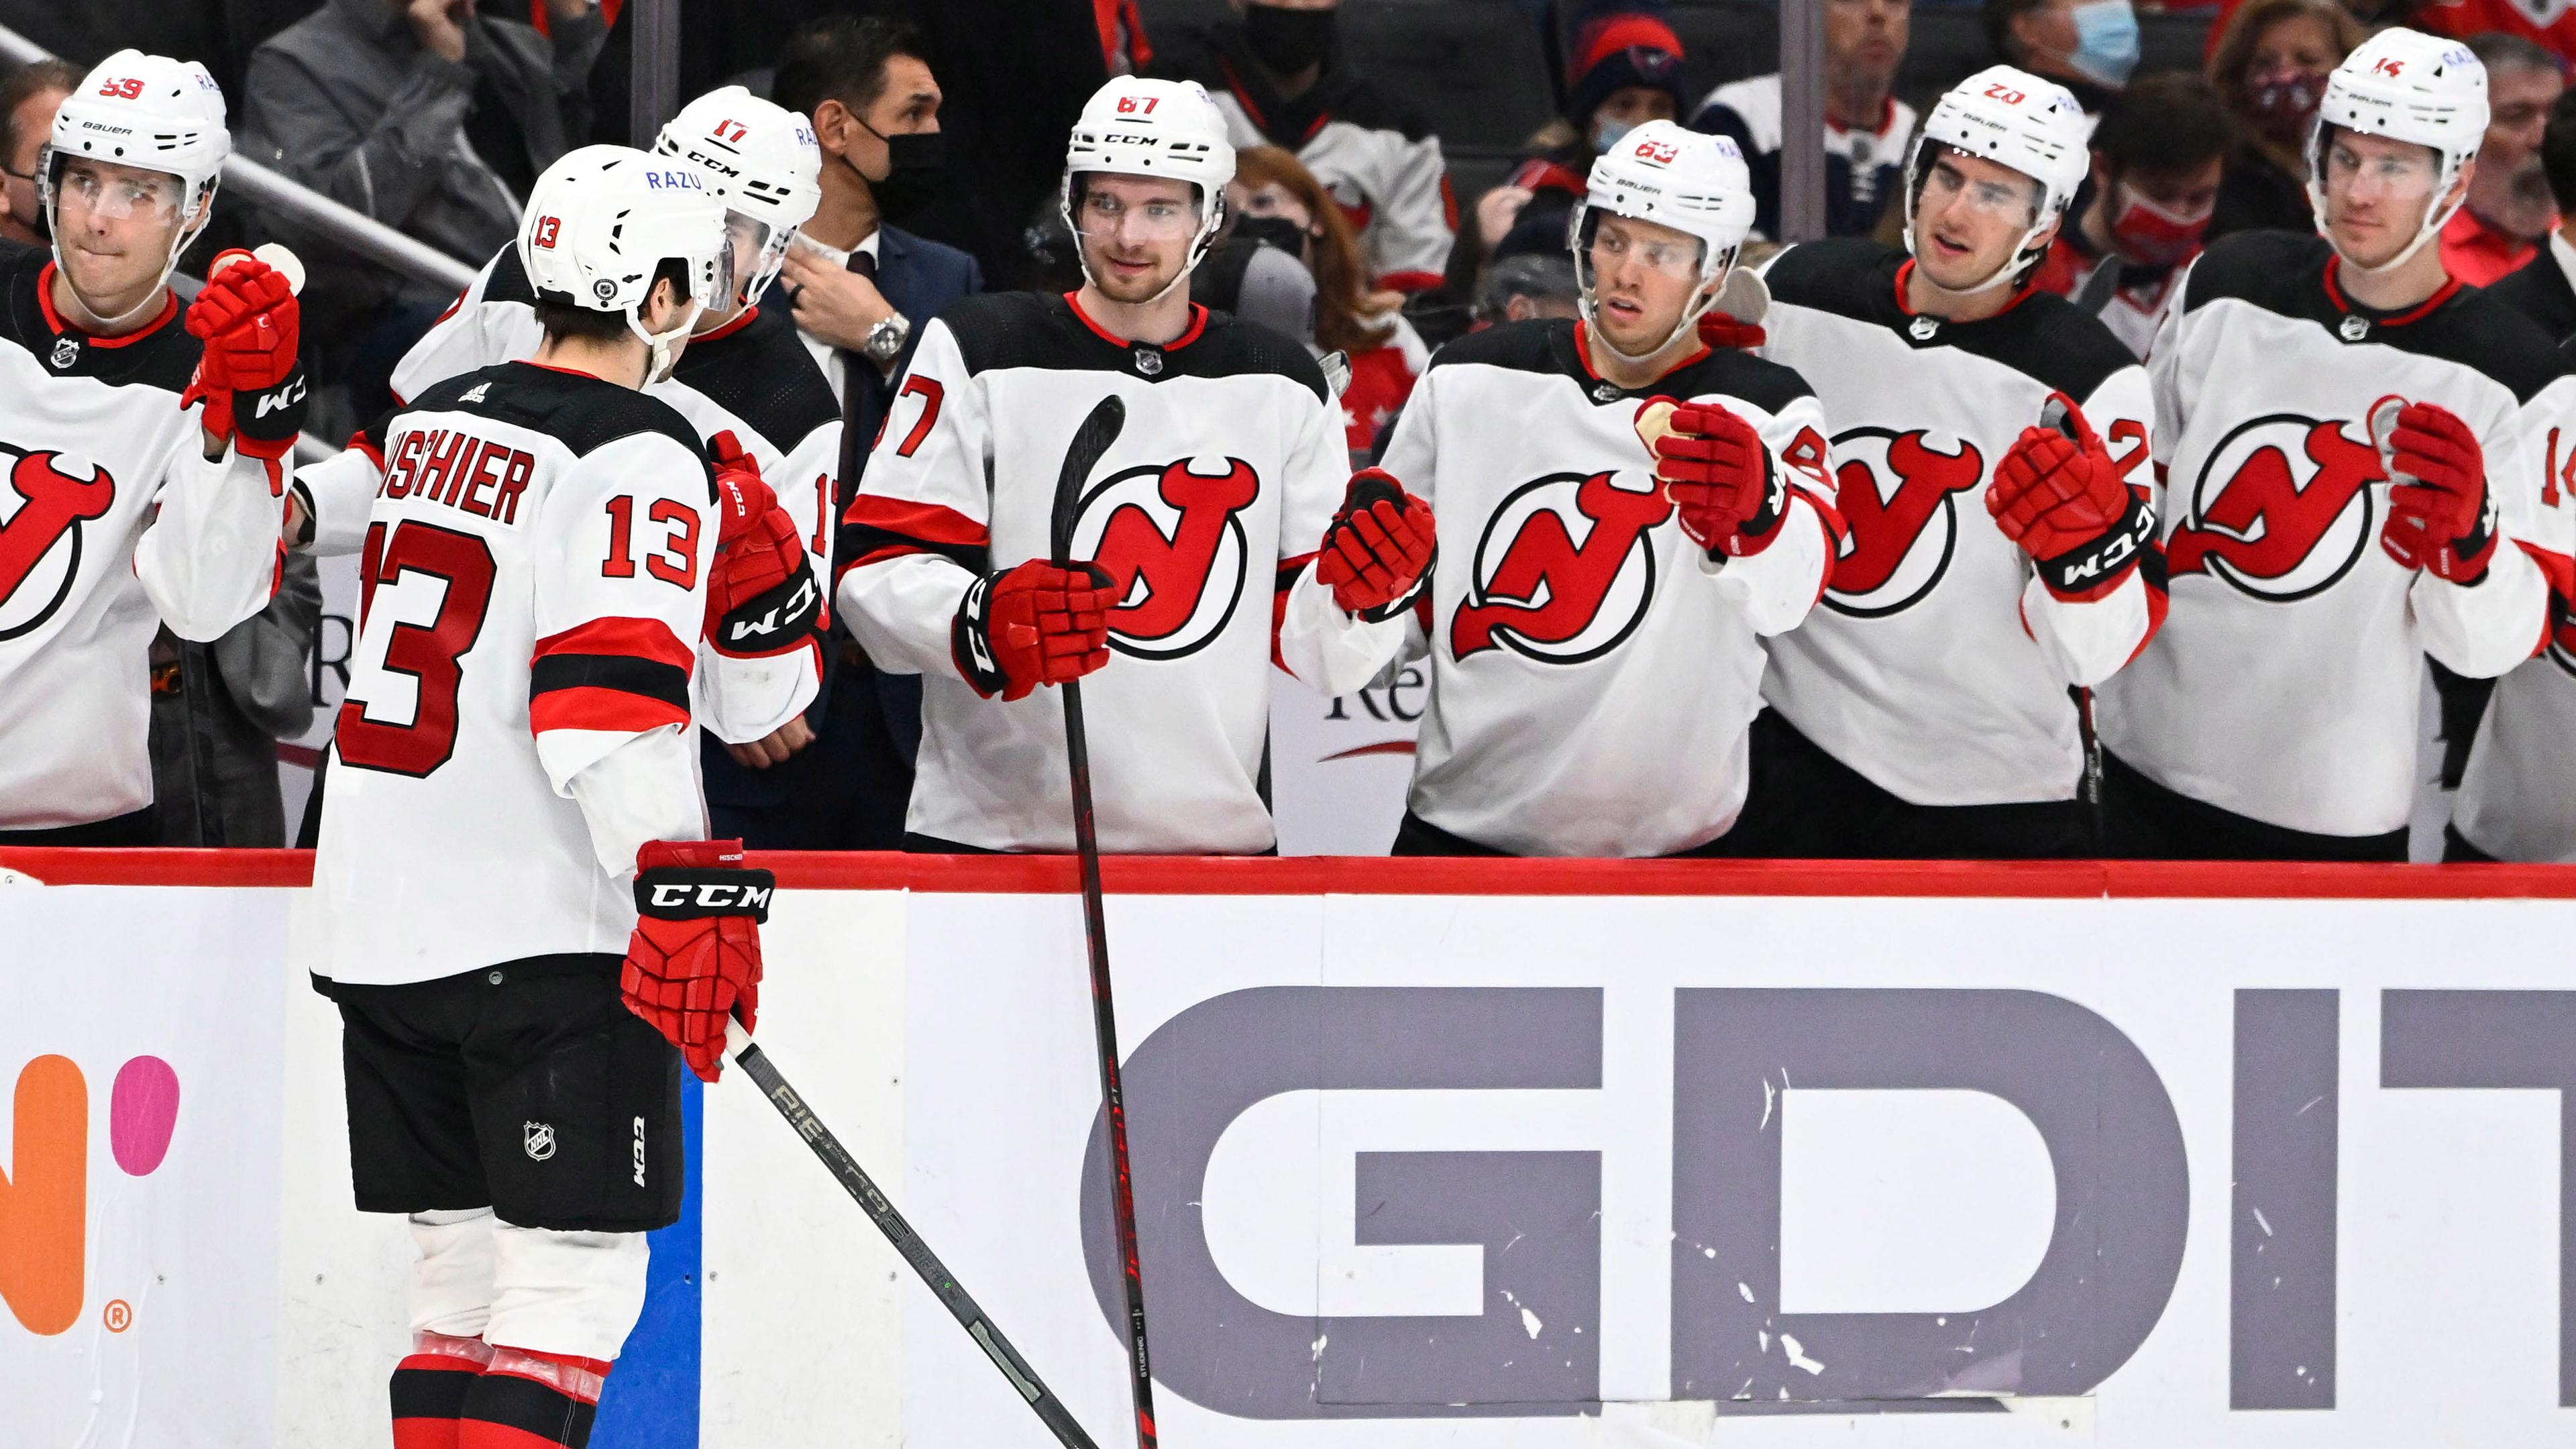 New Jersey Devils center Nico Hischier (13) is congratulated by teammates after scoring a goal against the Washington Capitals during the second period at Capital One Arena. / Brad Mills-USA TODAY Sports